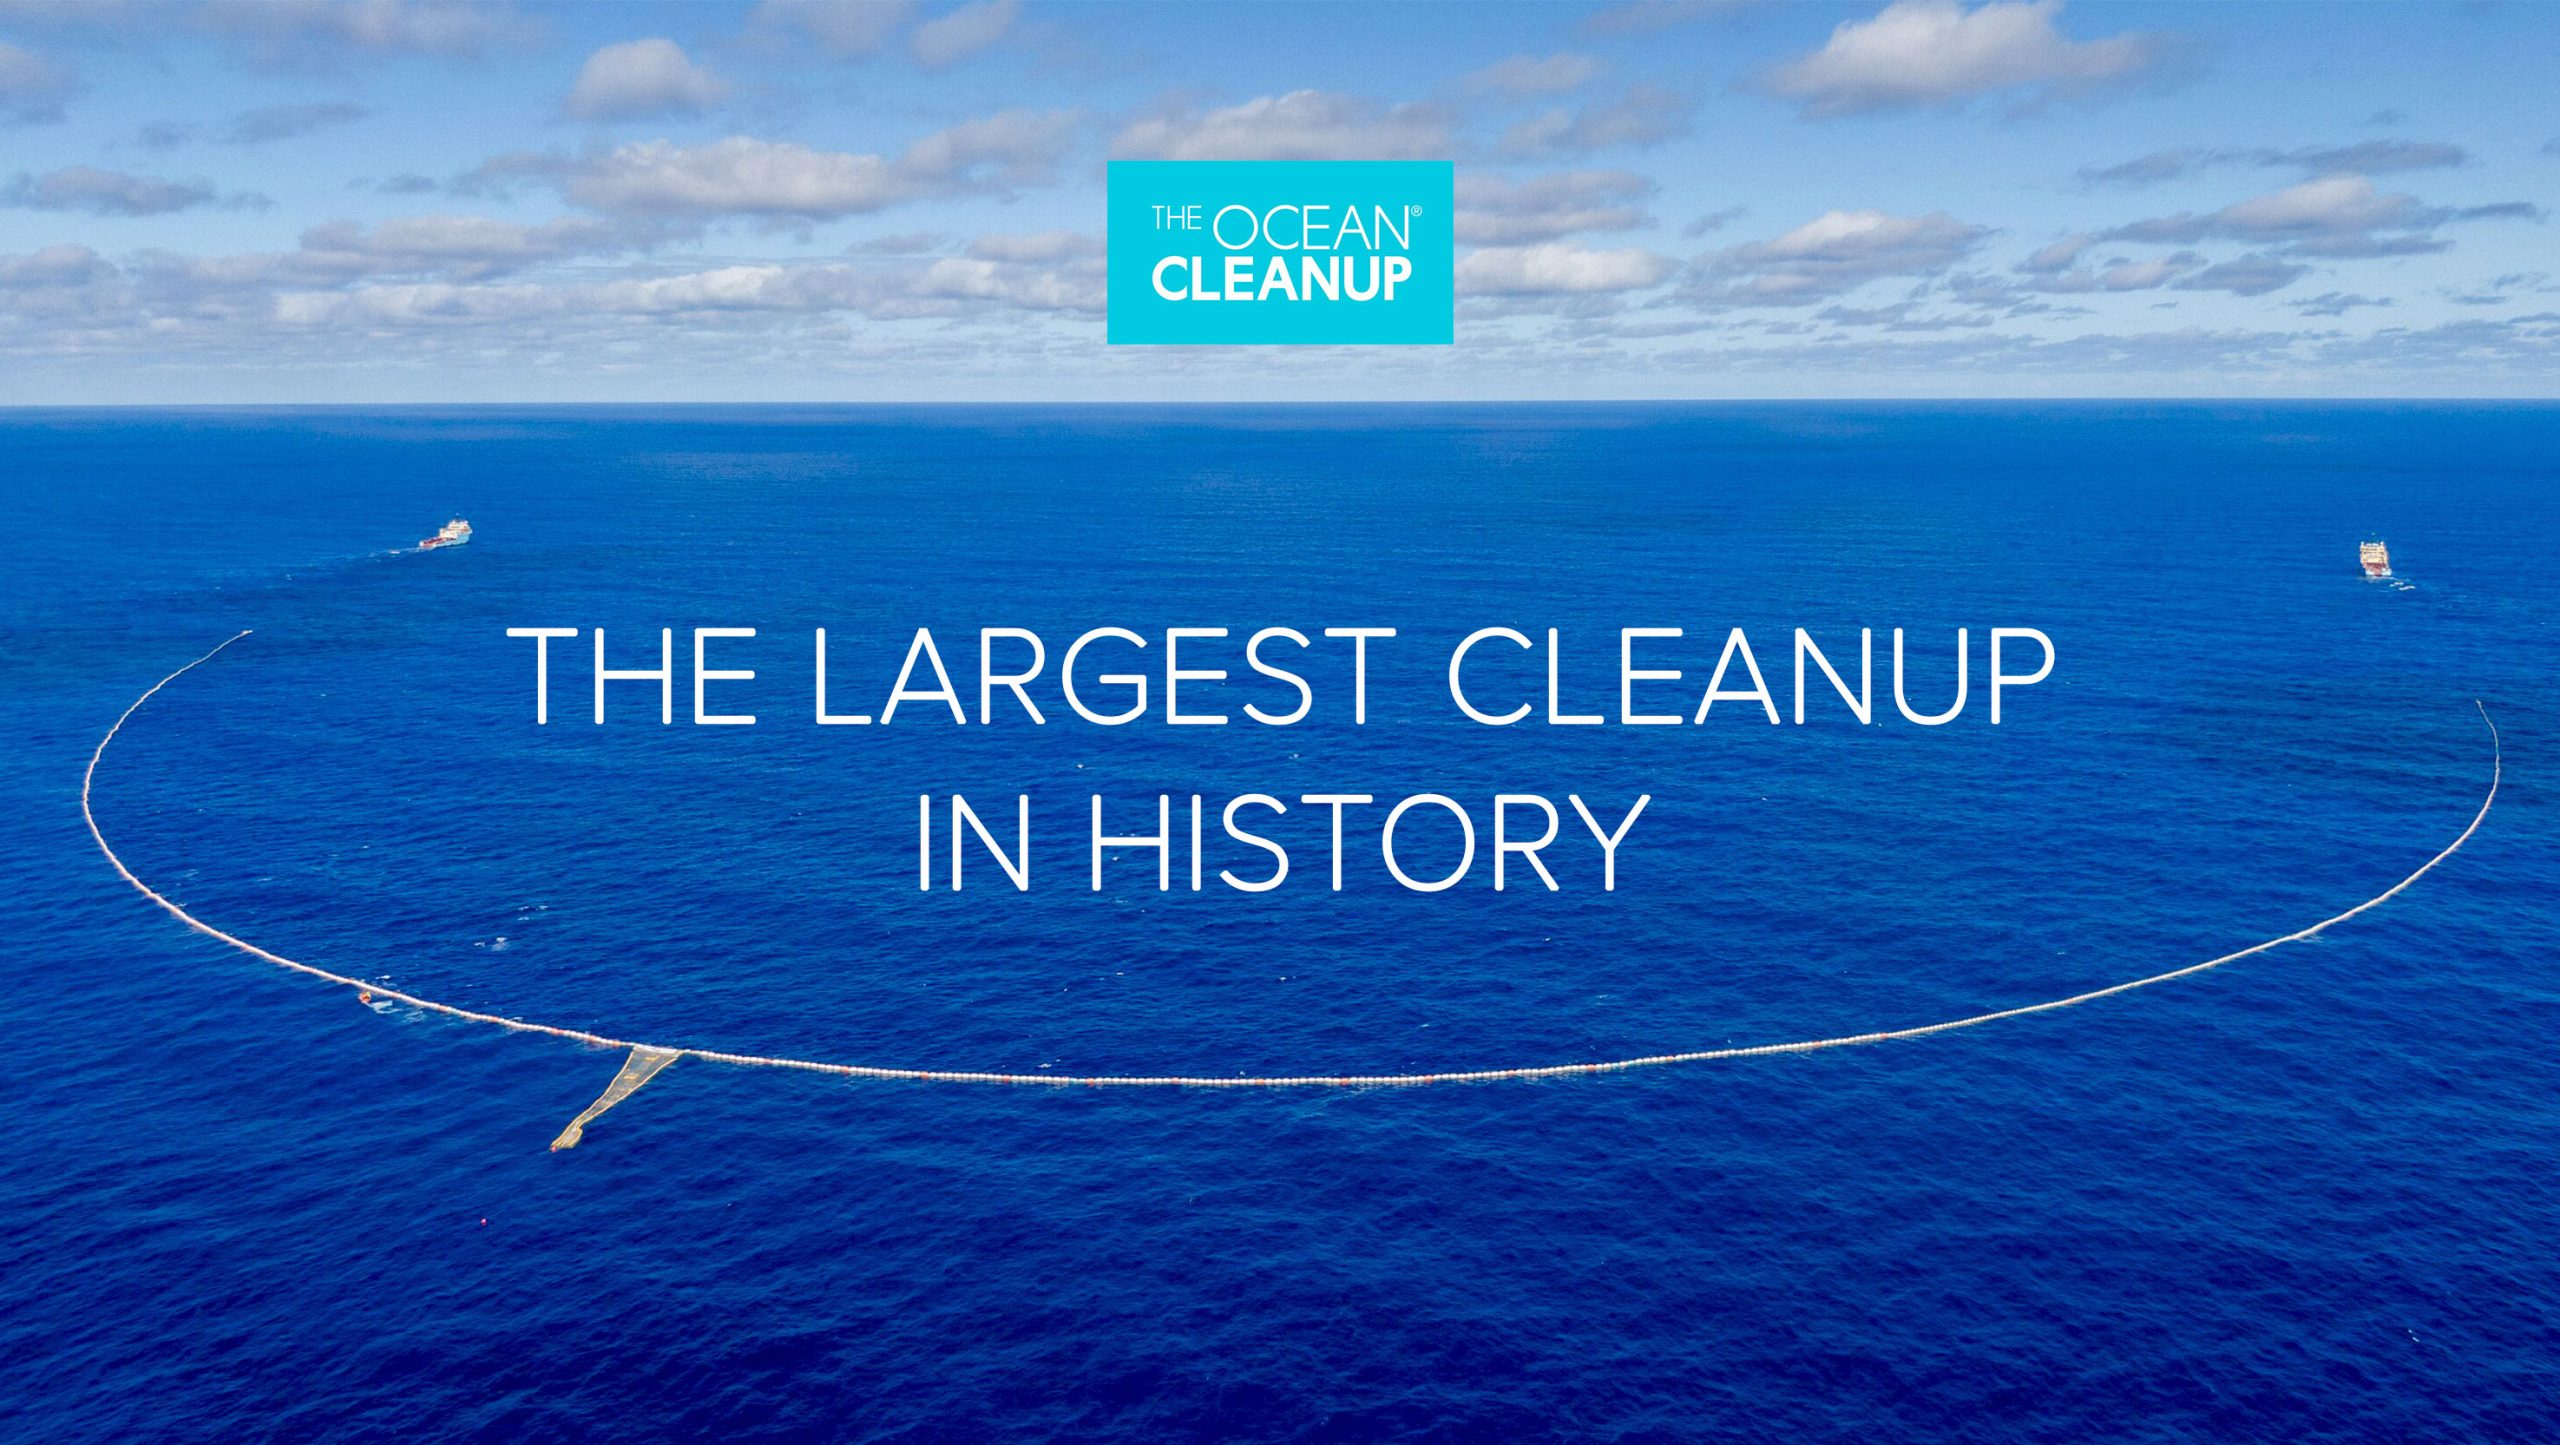 theoceancleanup.com